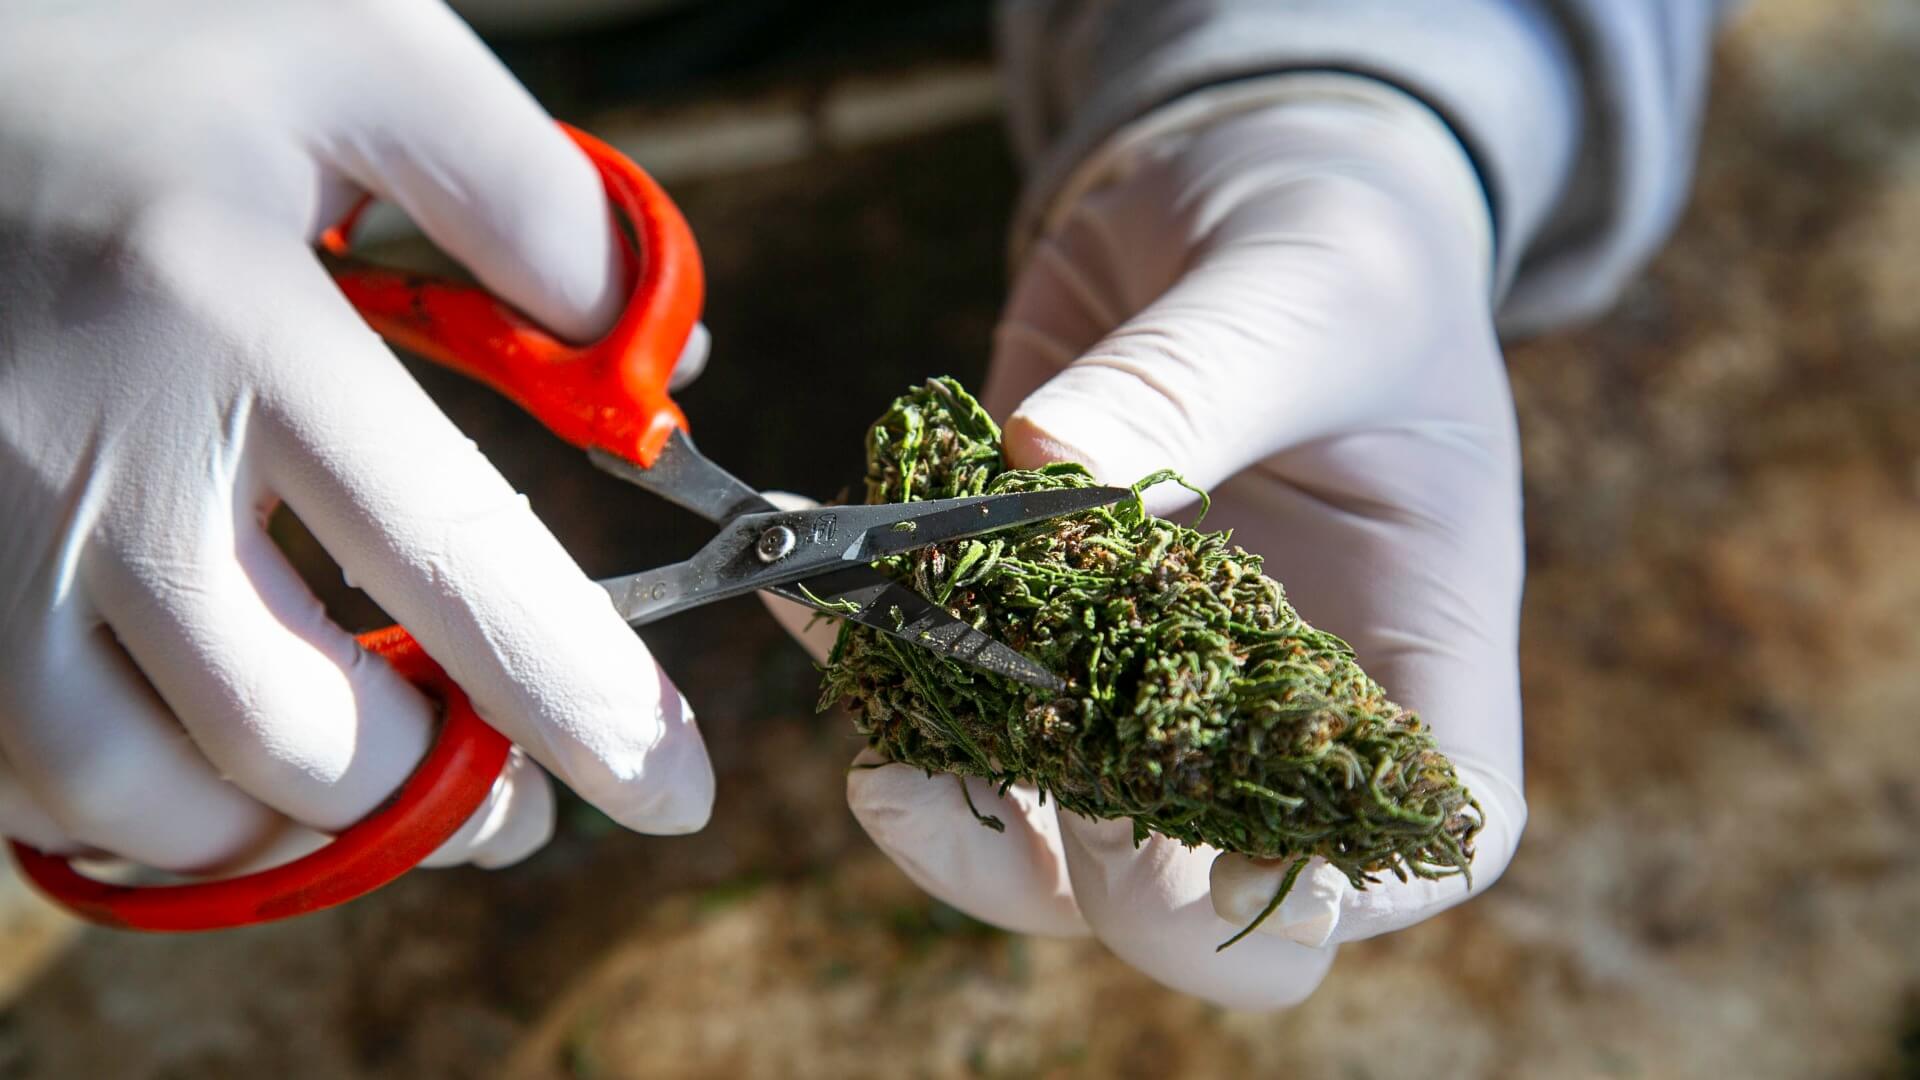 A man in gloves trimming cannabis bud